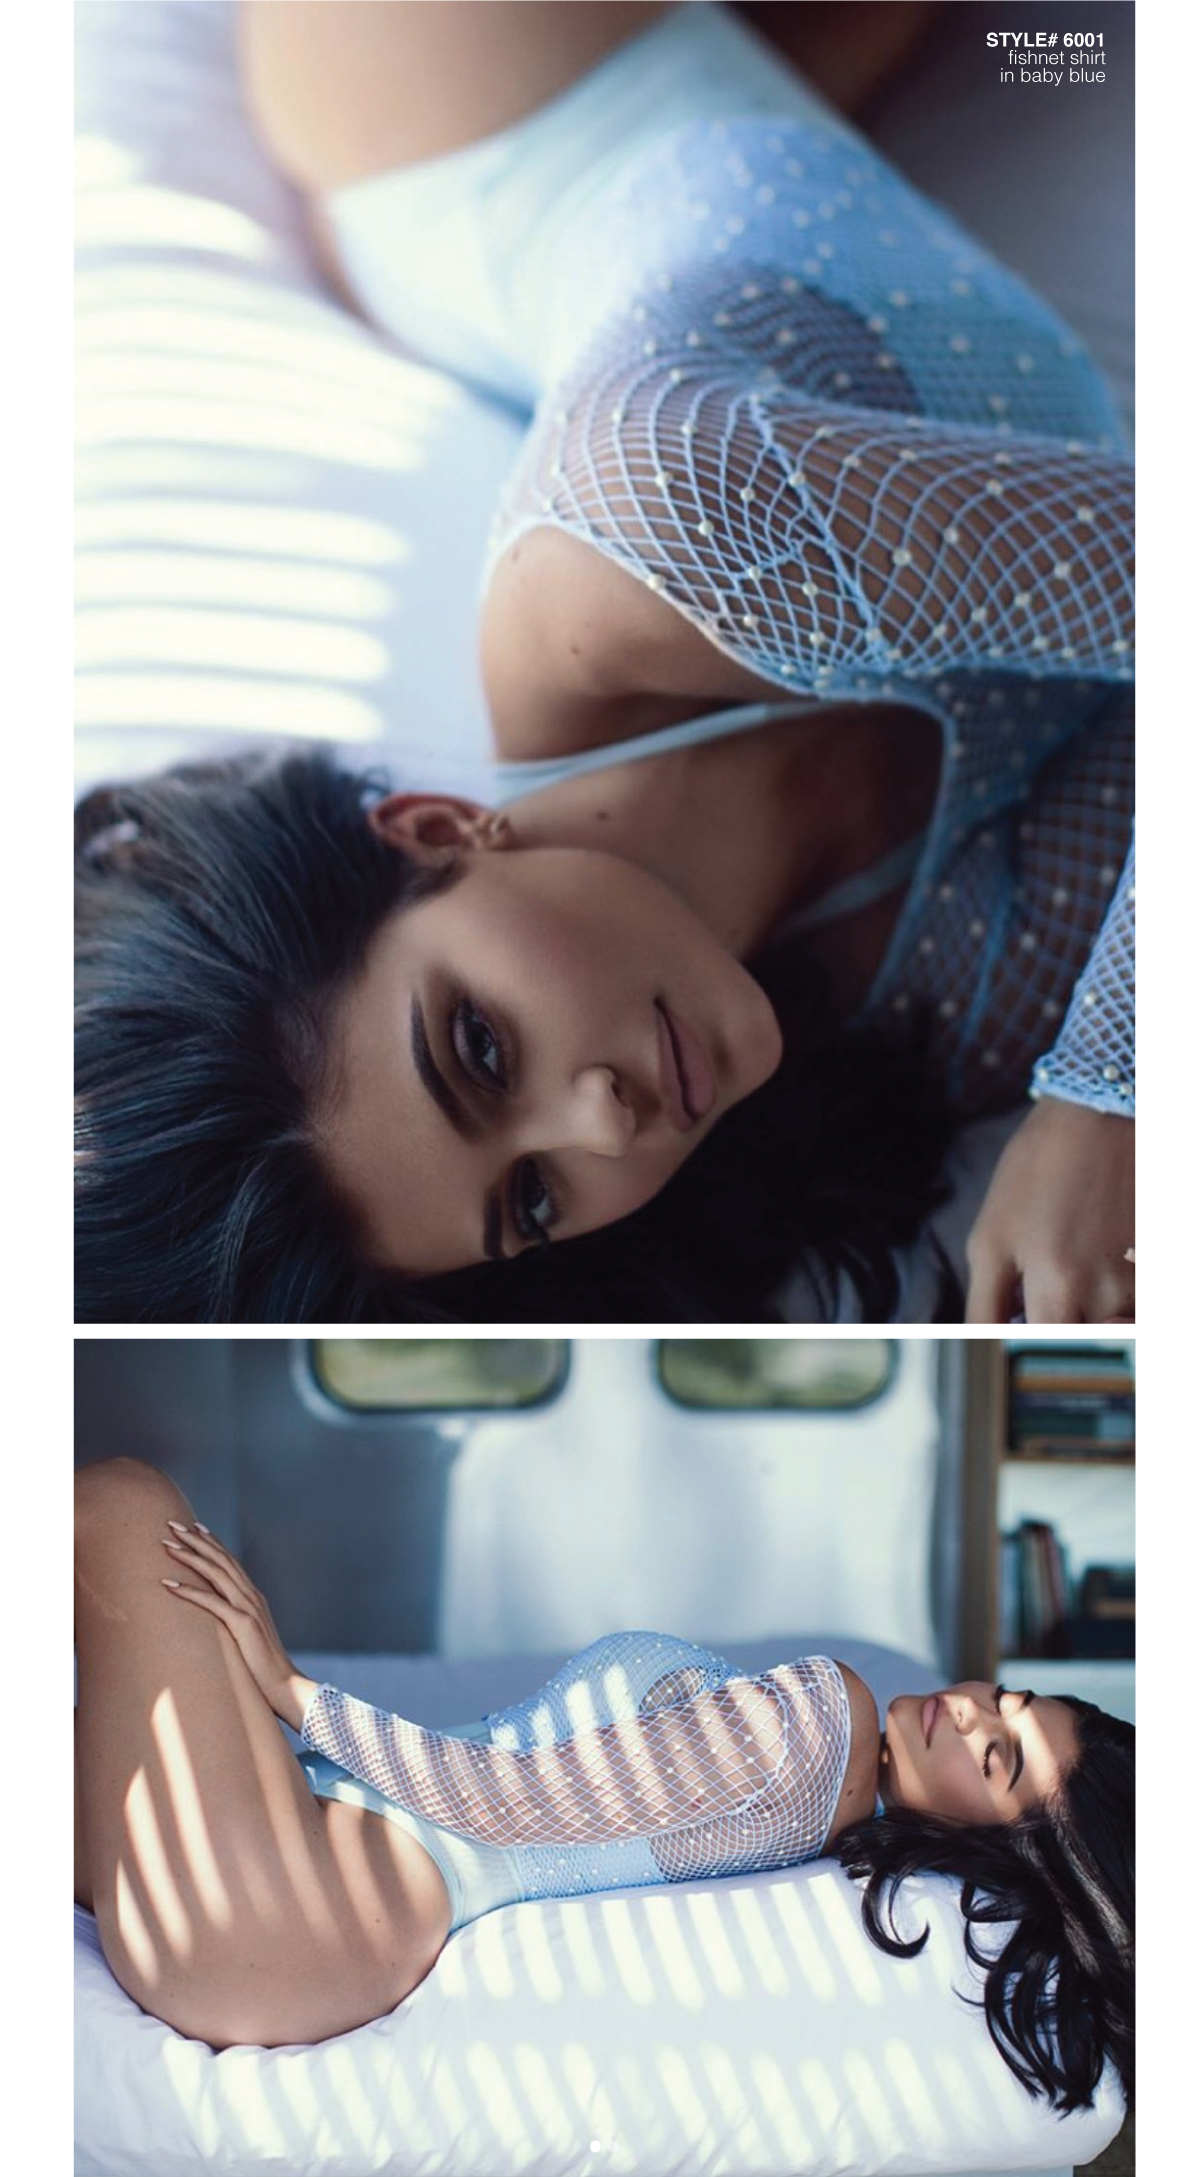 Kylie Jenner with laying down wearing a baby blue fishnet shirt